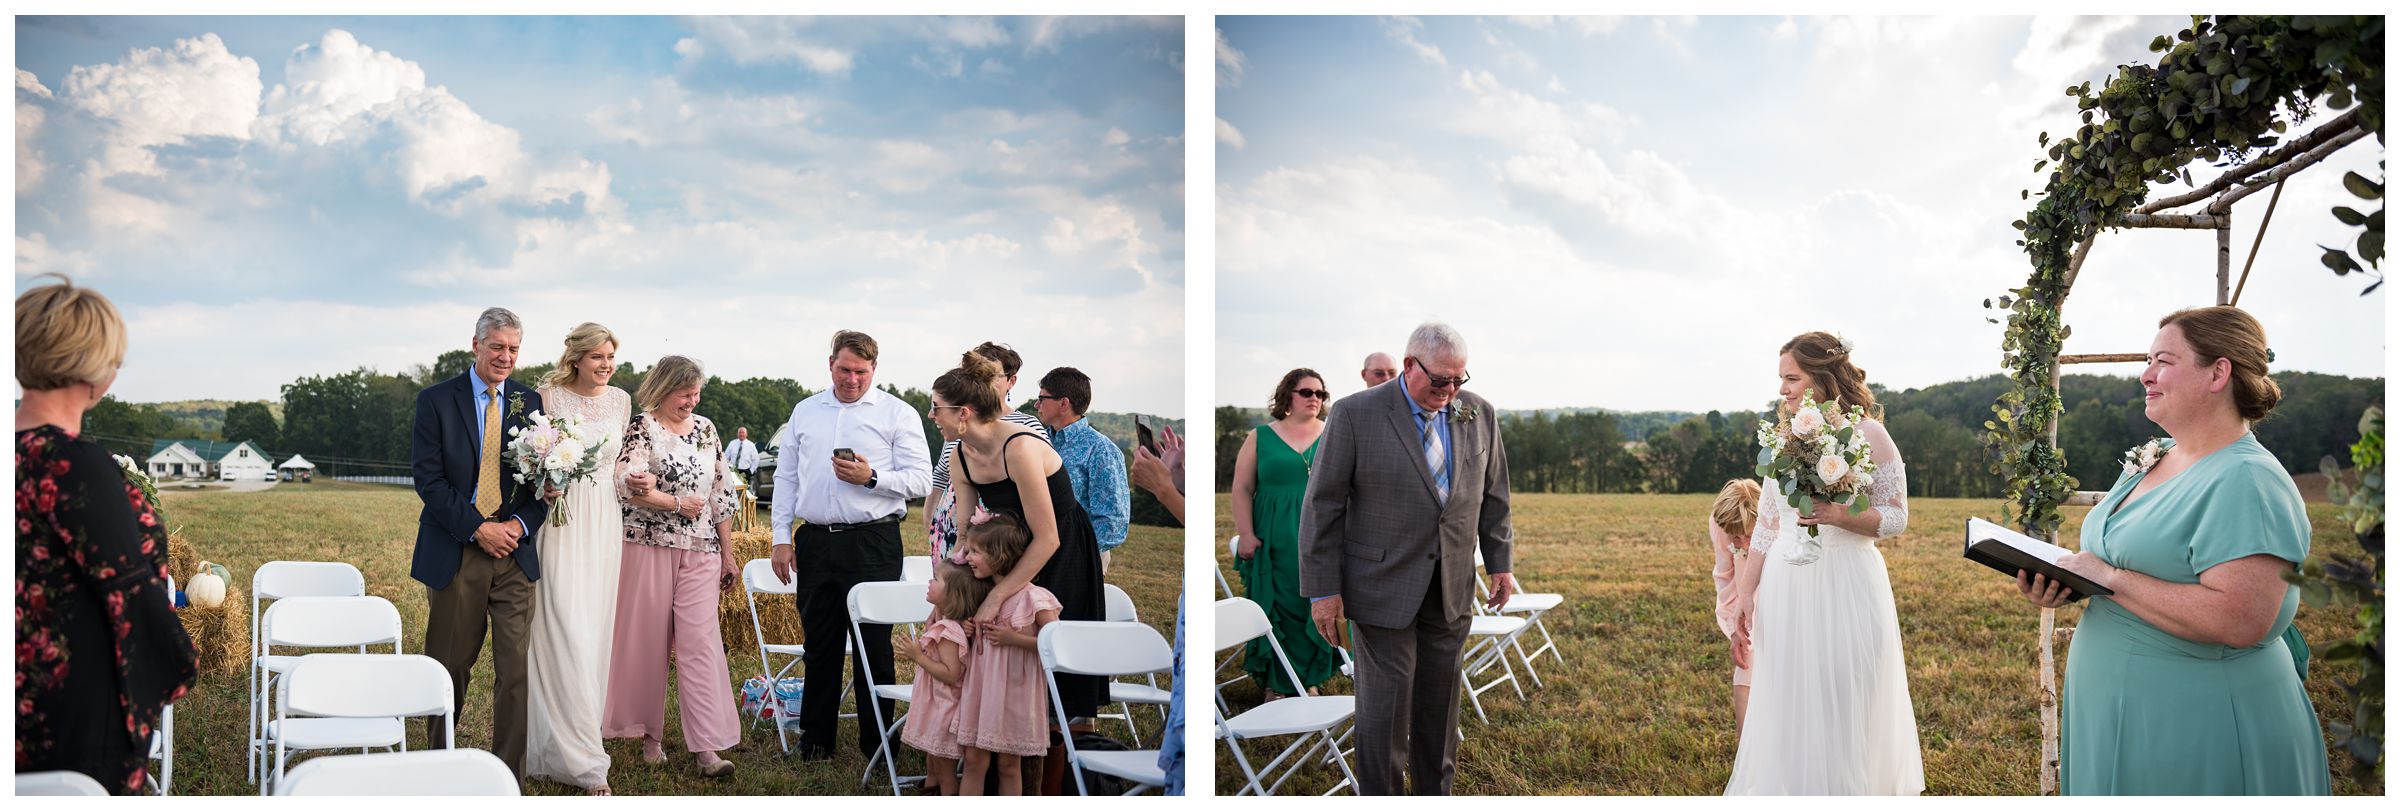 Two brides walking down the aisle during same-sex wedding ceremony on farm